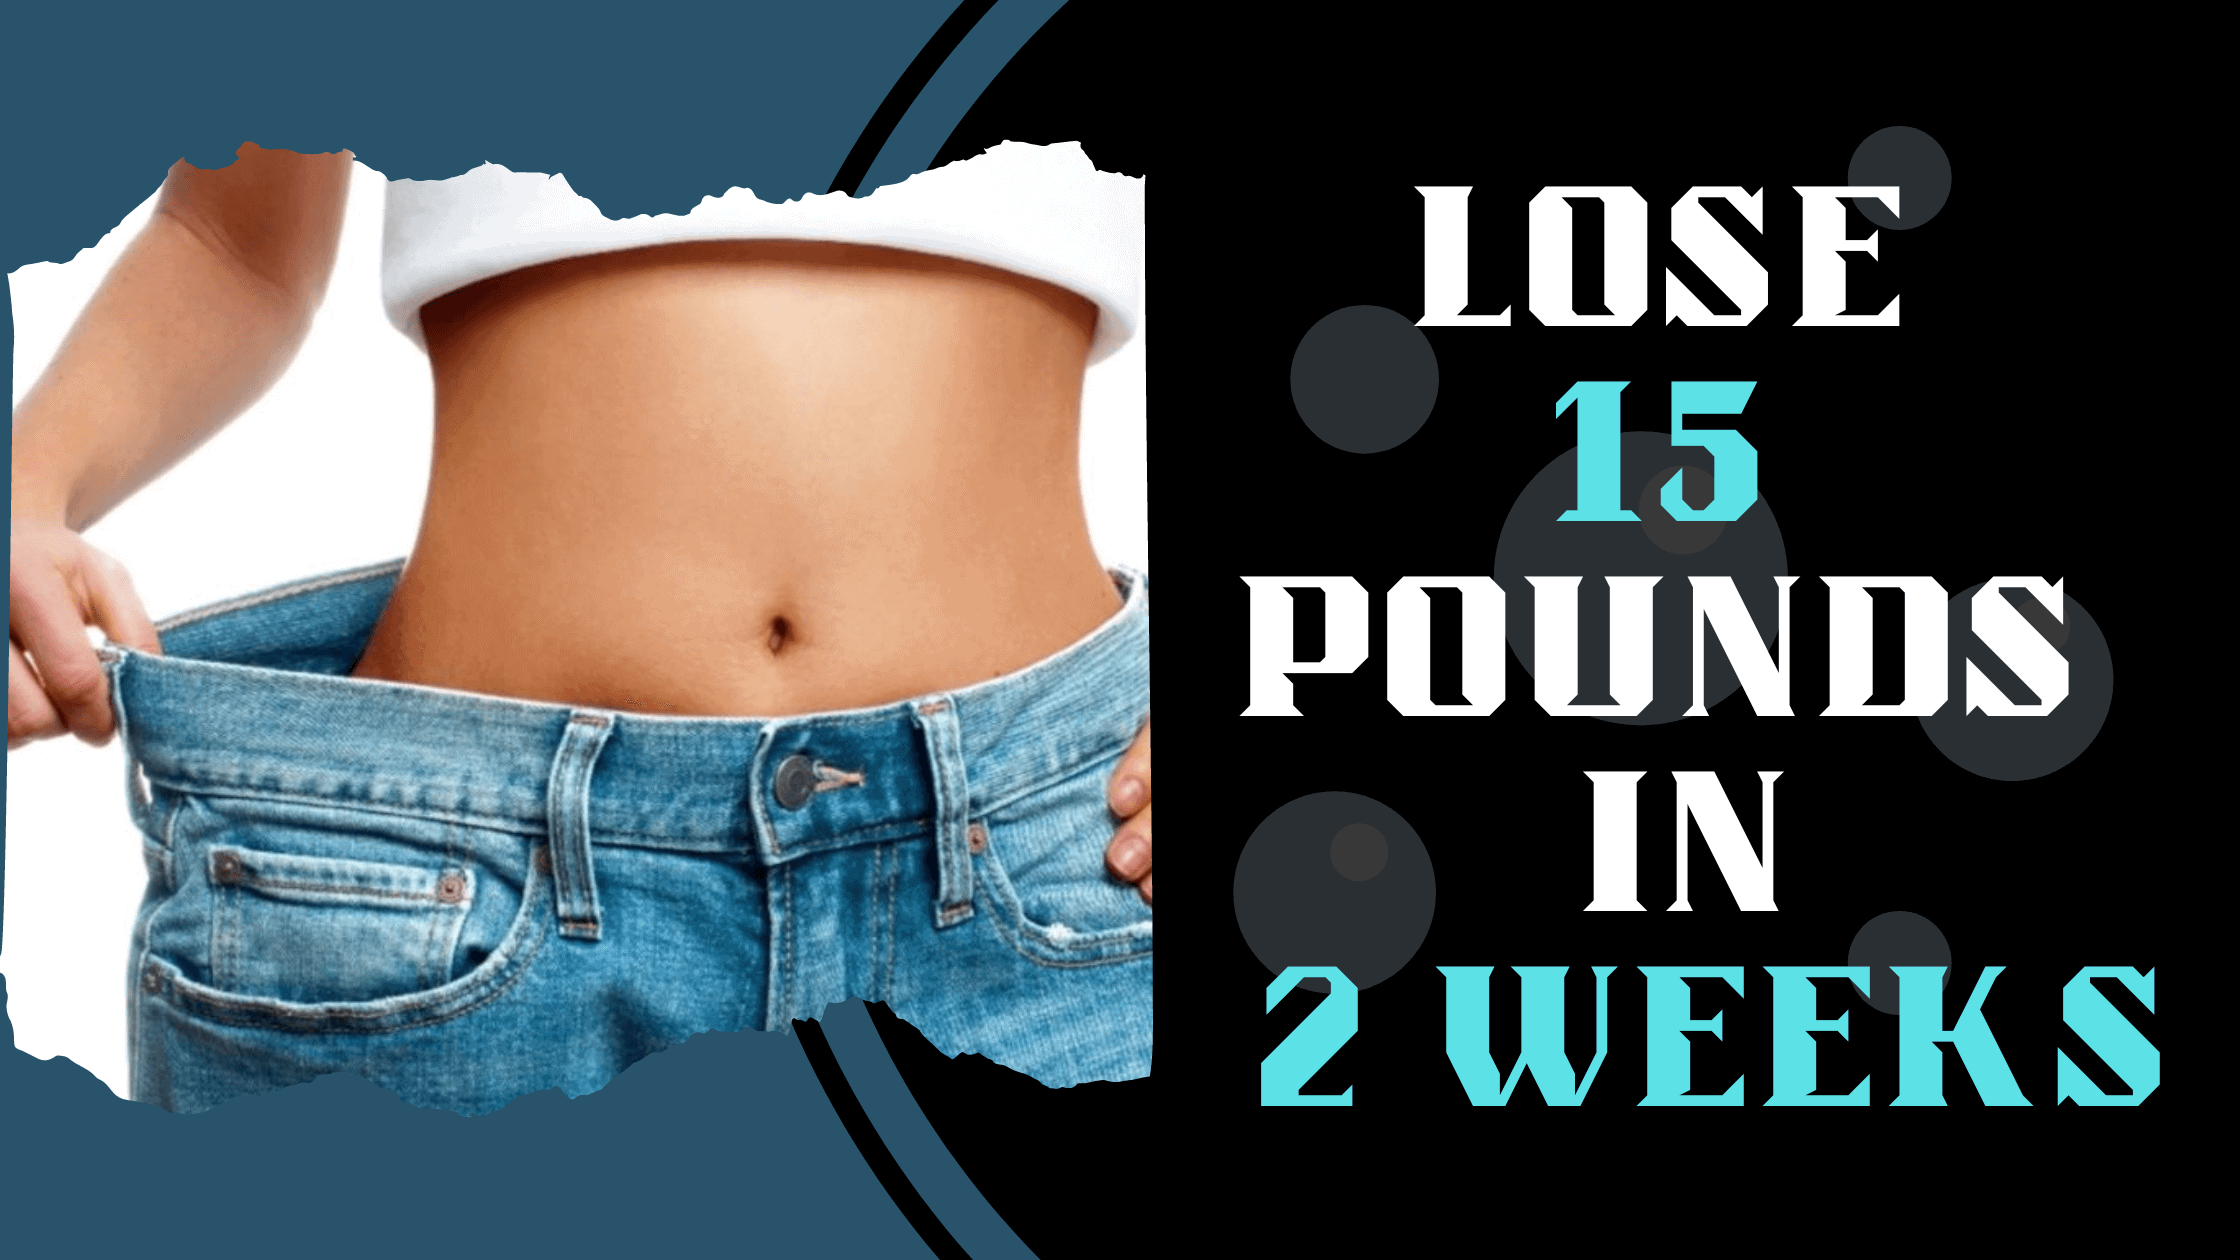 How To Lose 15 Pounds In 2 Weeks